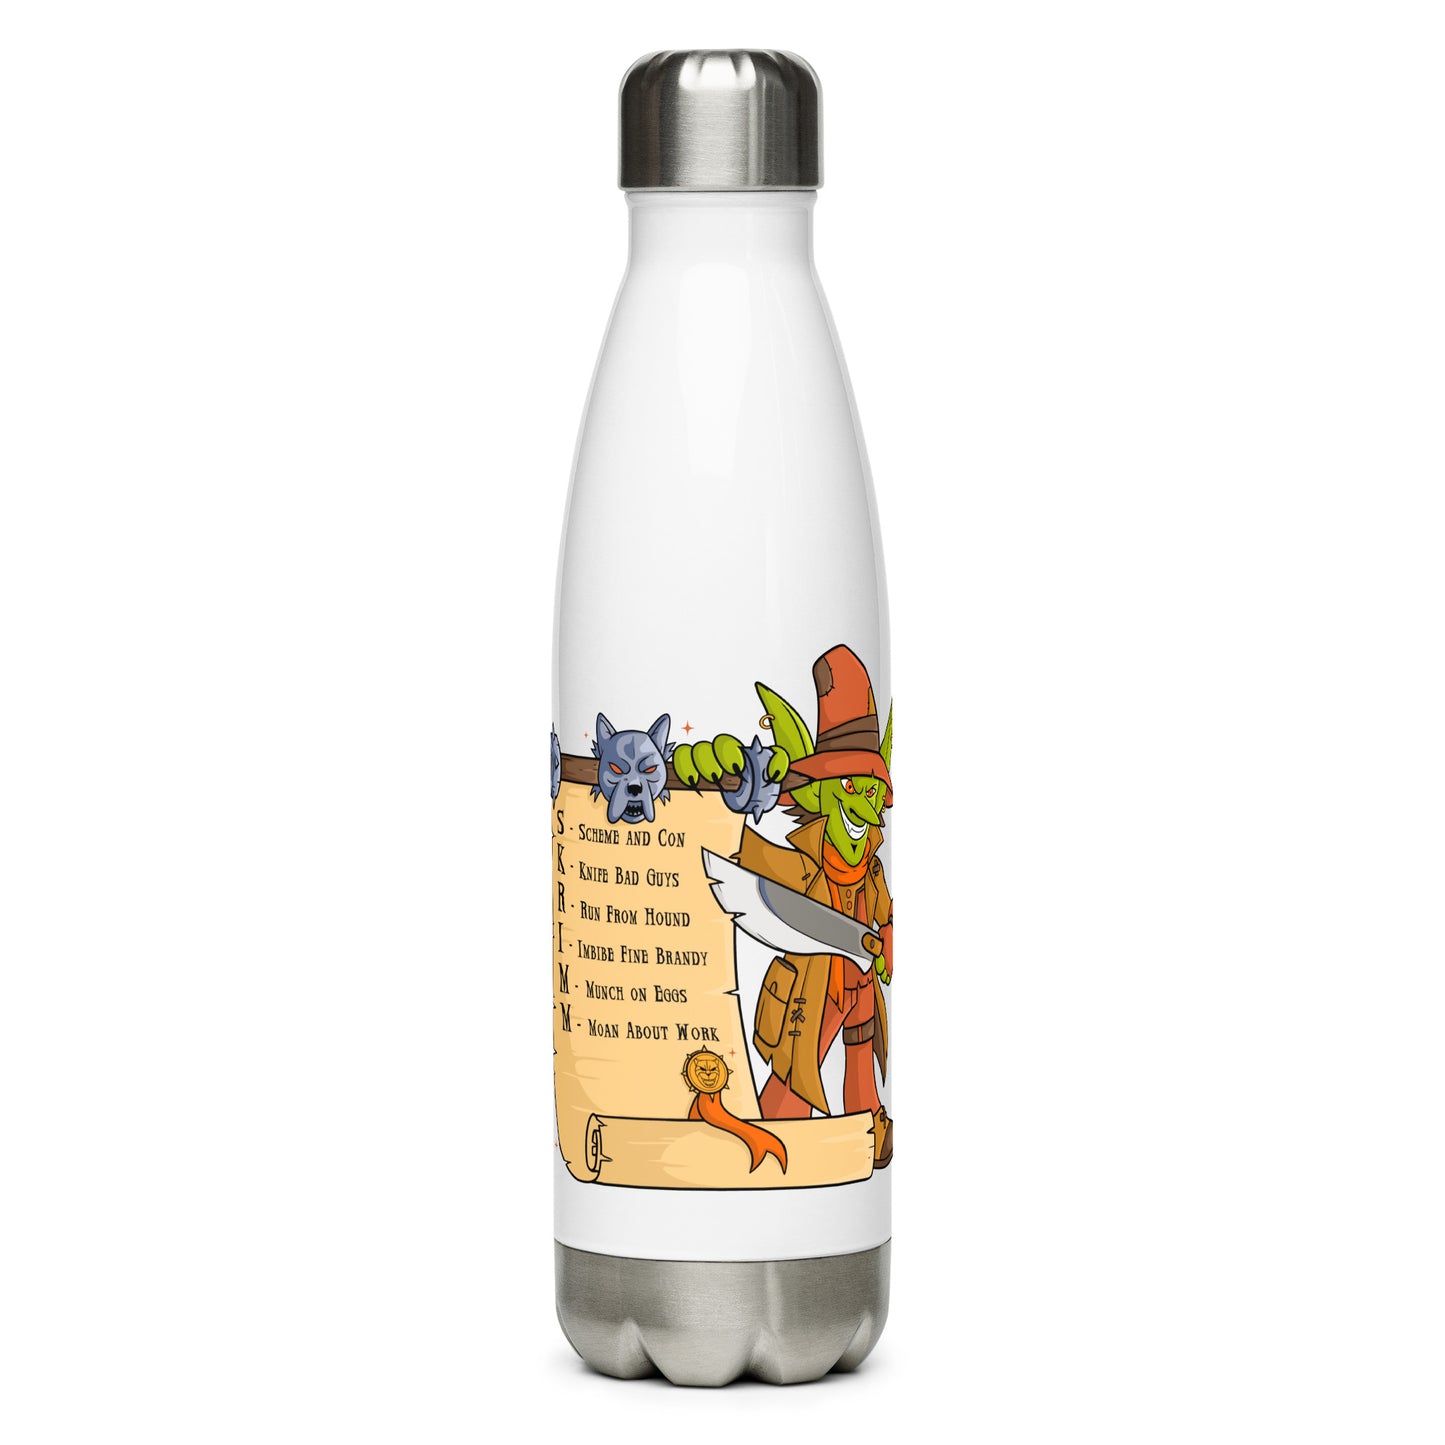 The S.K.R.I.M.M. System - Water Bottle